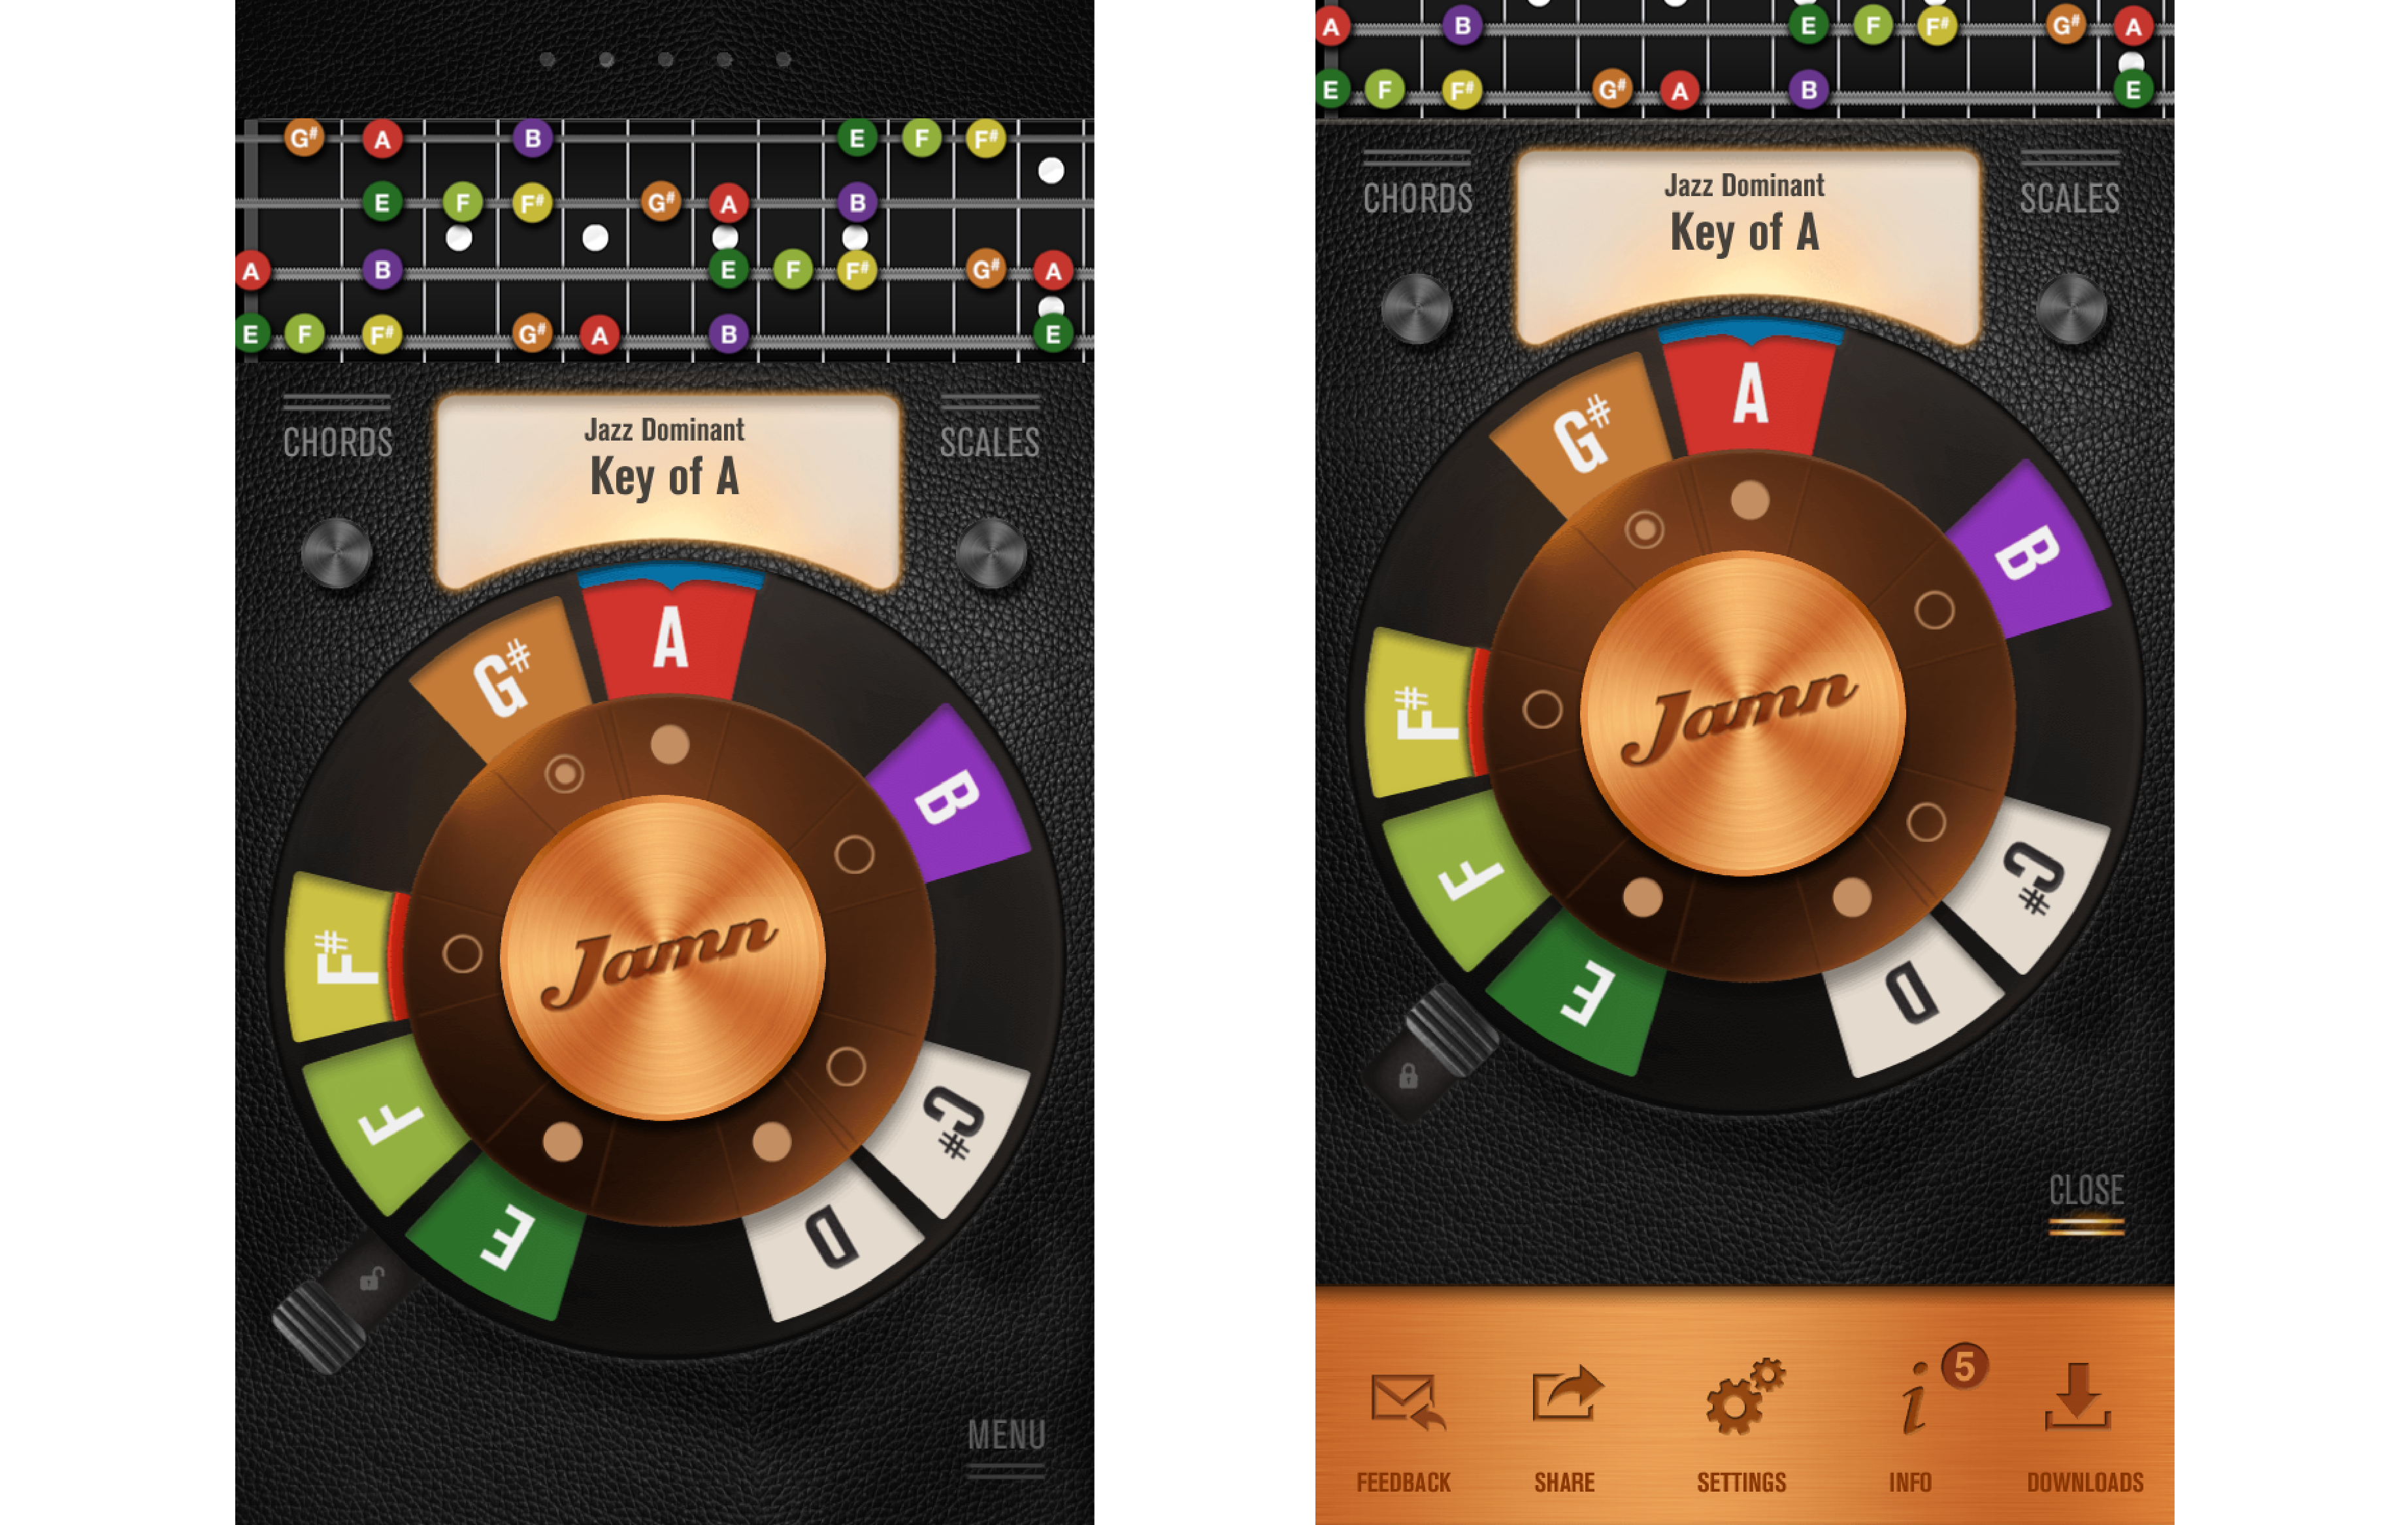 Today's Jamn with an interface illustrating how to play a chord 